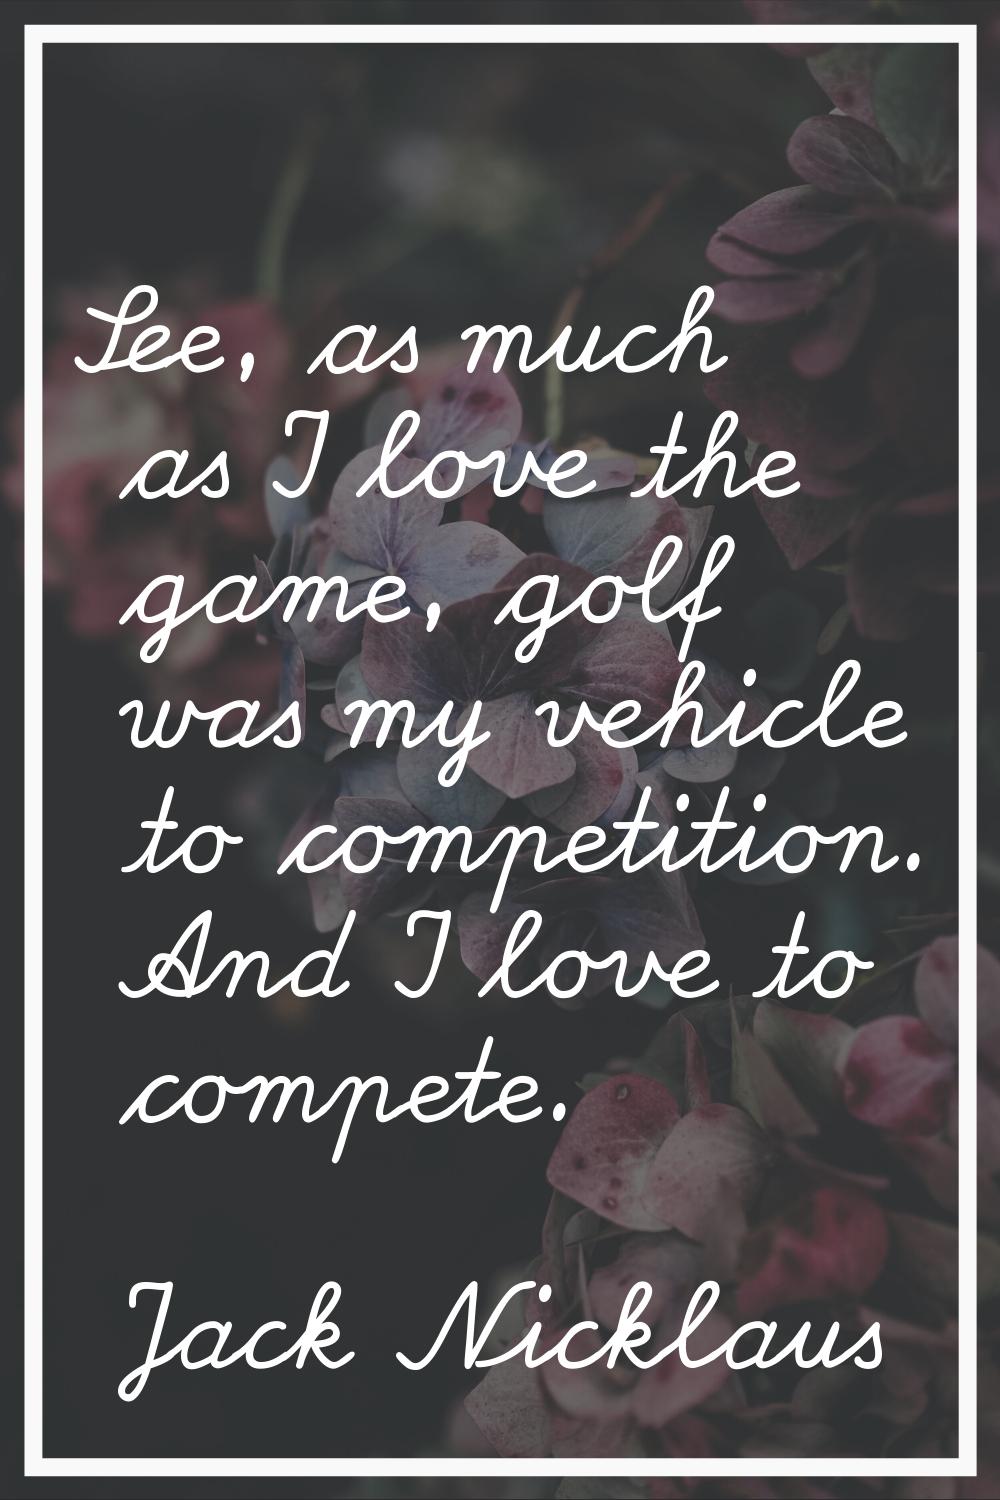 See, as much as I love the game, golf was my vehicle to competition. And I love to compete.